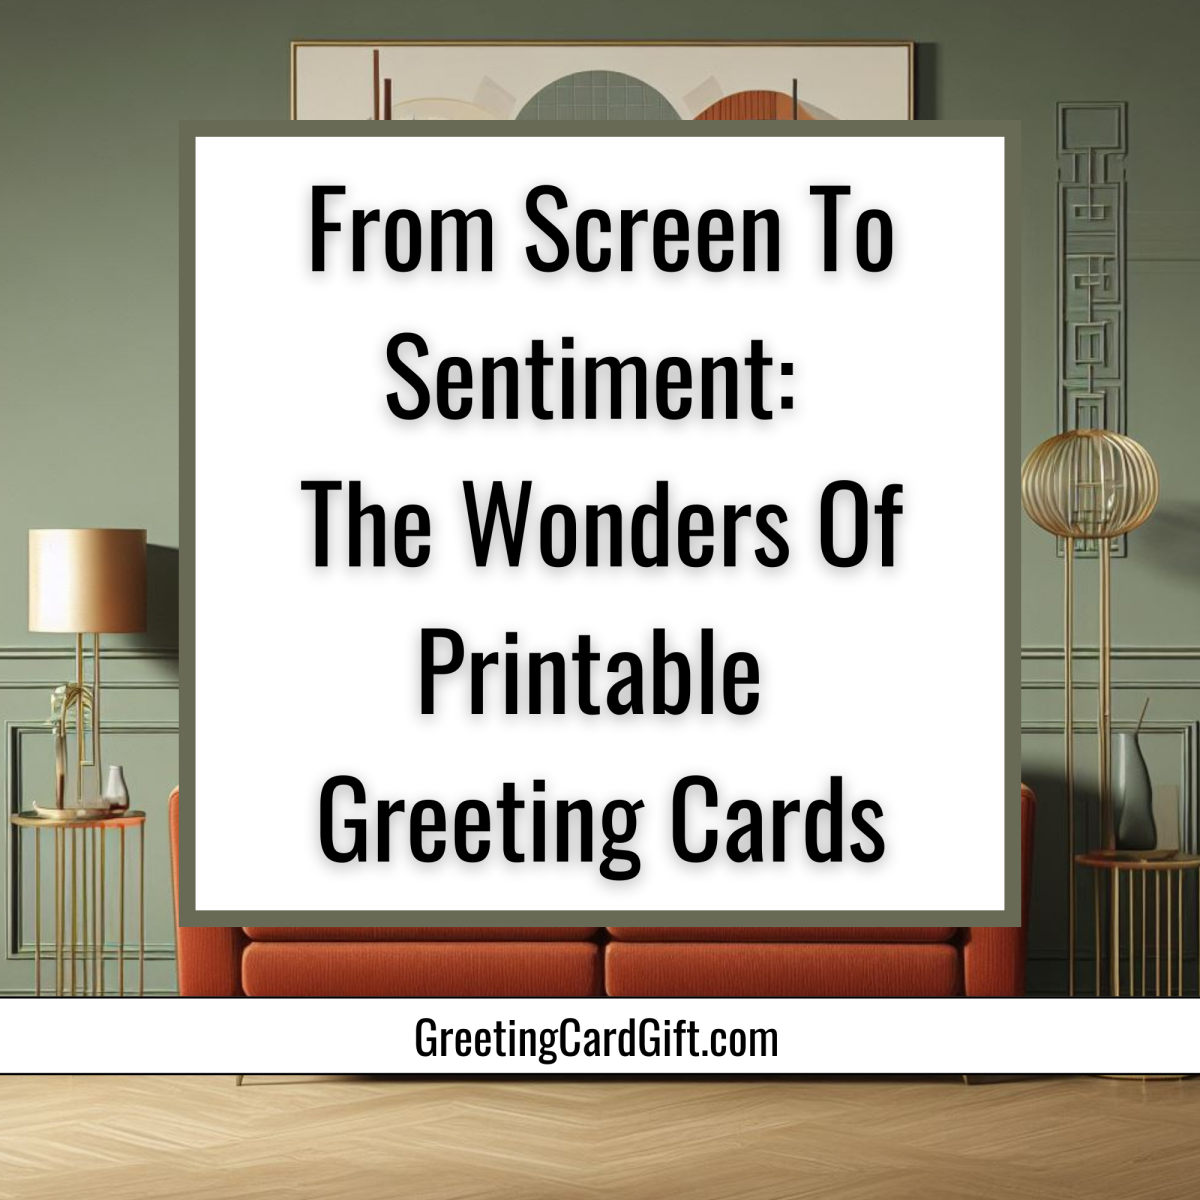 From Screen To Sentiment: The Wonders Of Printable Greeting Cards